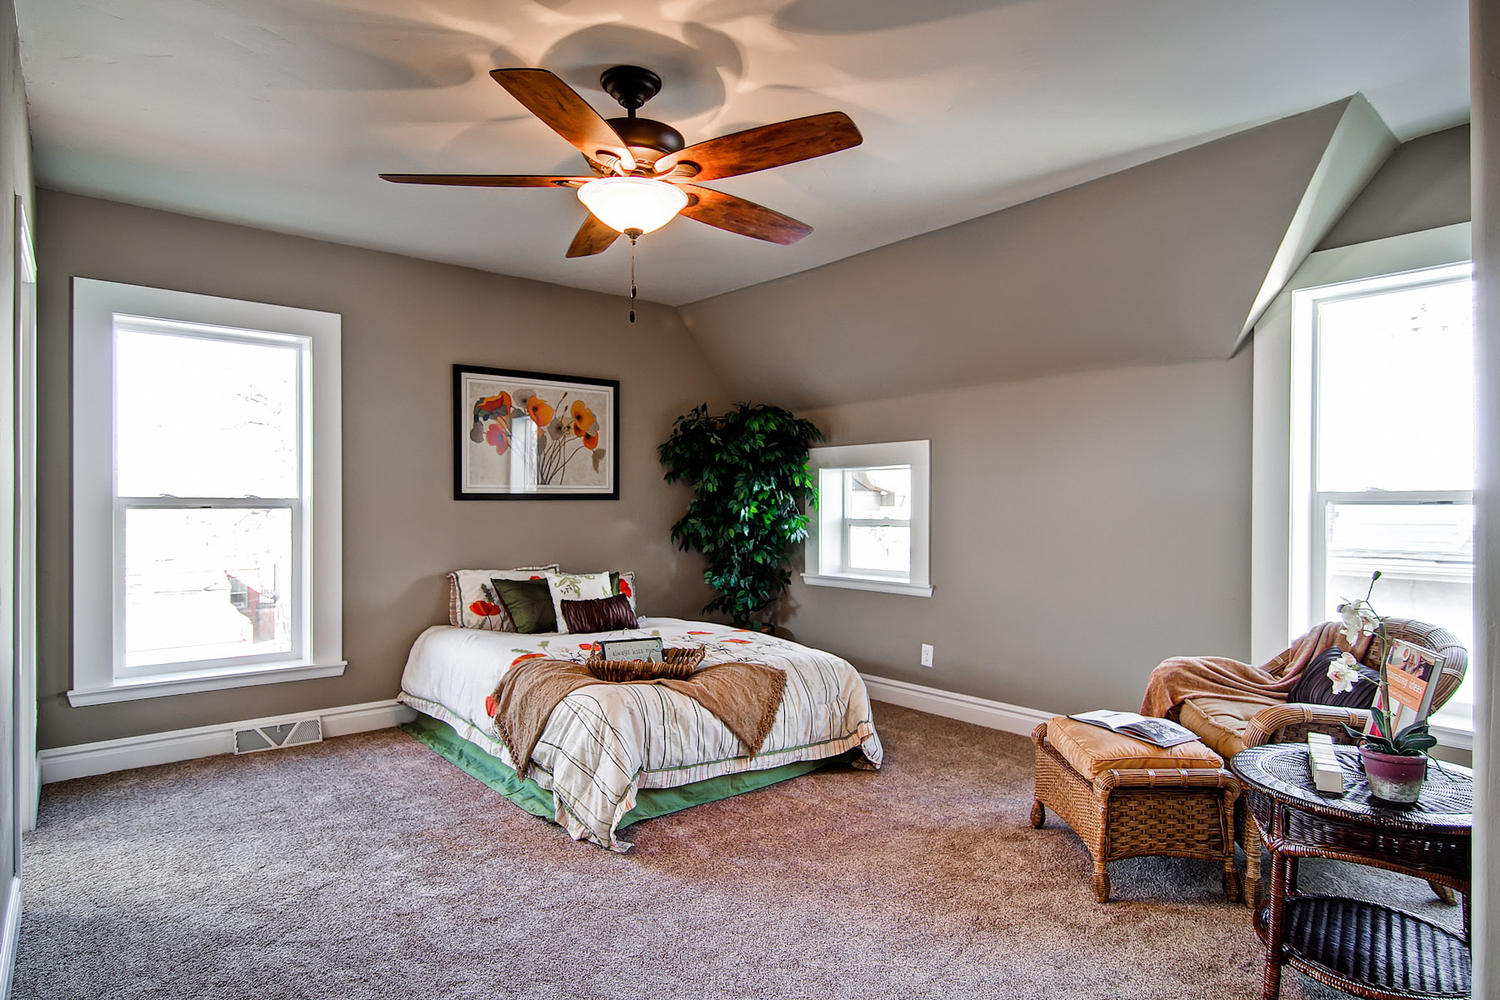 Master Bedroom residential townhouse multi-family Real estate Projects - Weins Development Group - Award-winning real estate developers in Denver, Colorado. Top #1 of Builders producing high-quality townhomes, condos, apartments, retail, & office projects